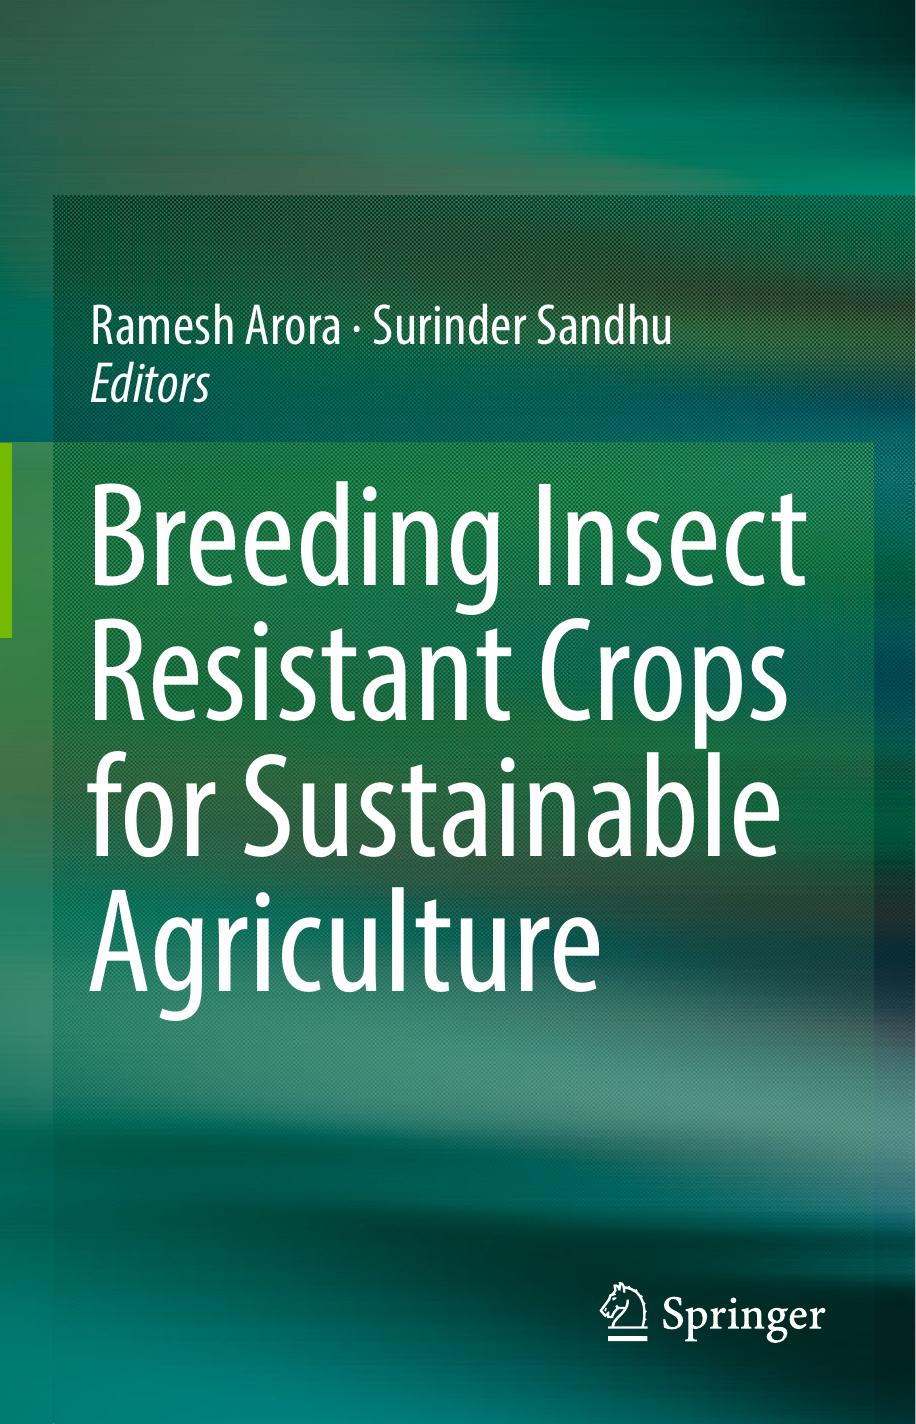 Breeding Insect Resistant Crops for Sustainable Agriculture2017